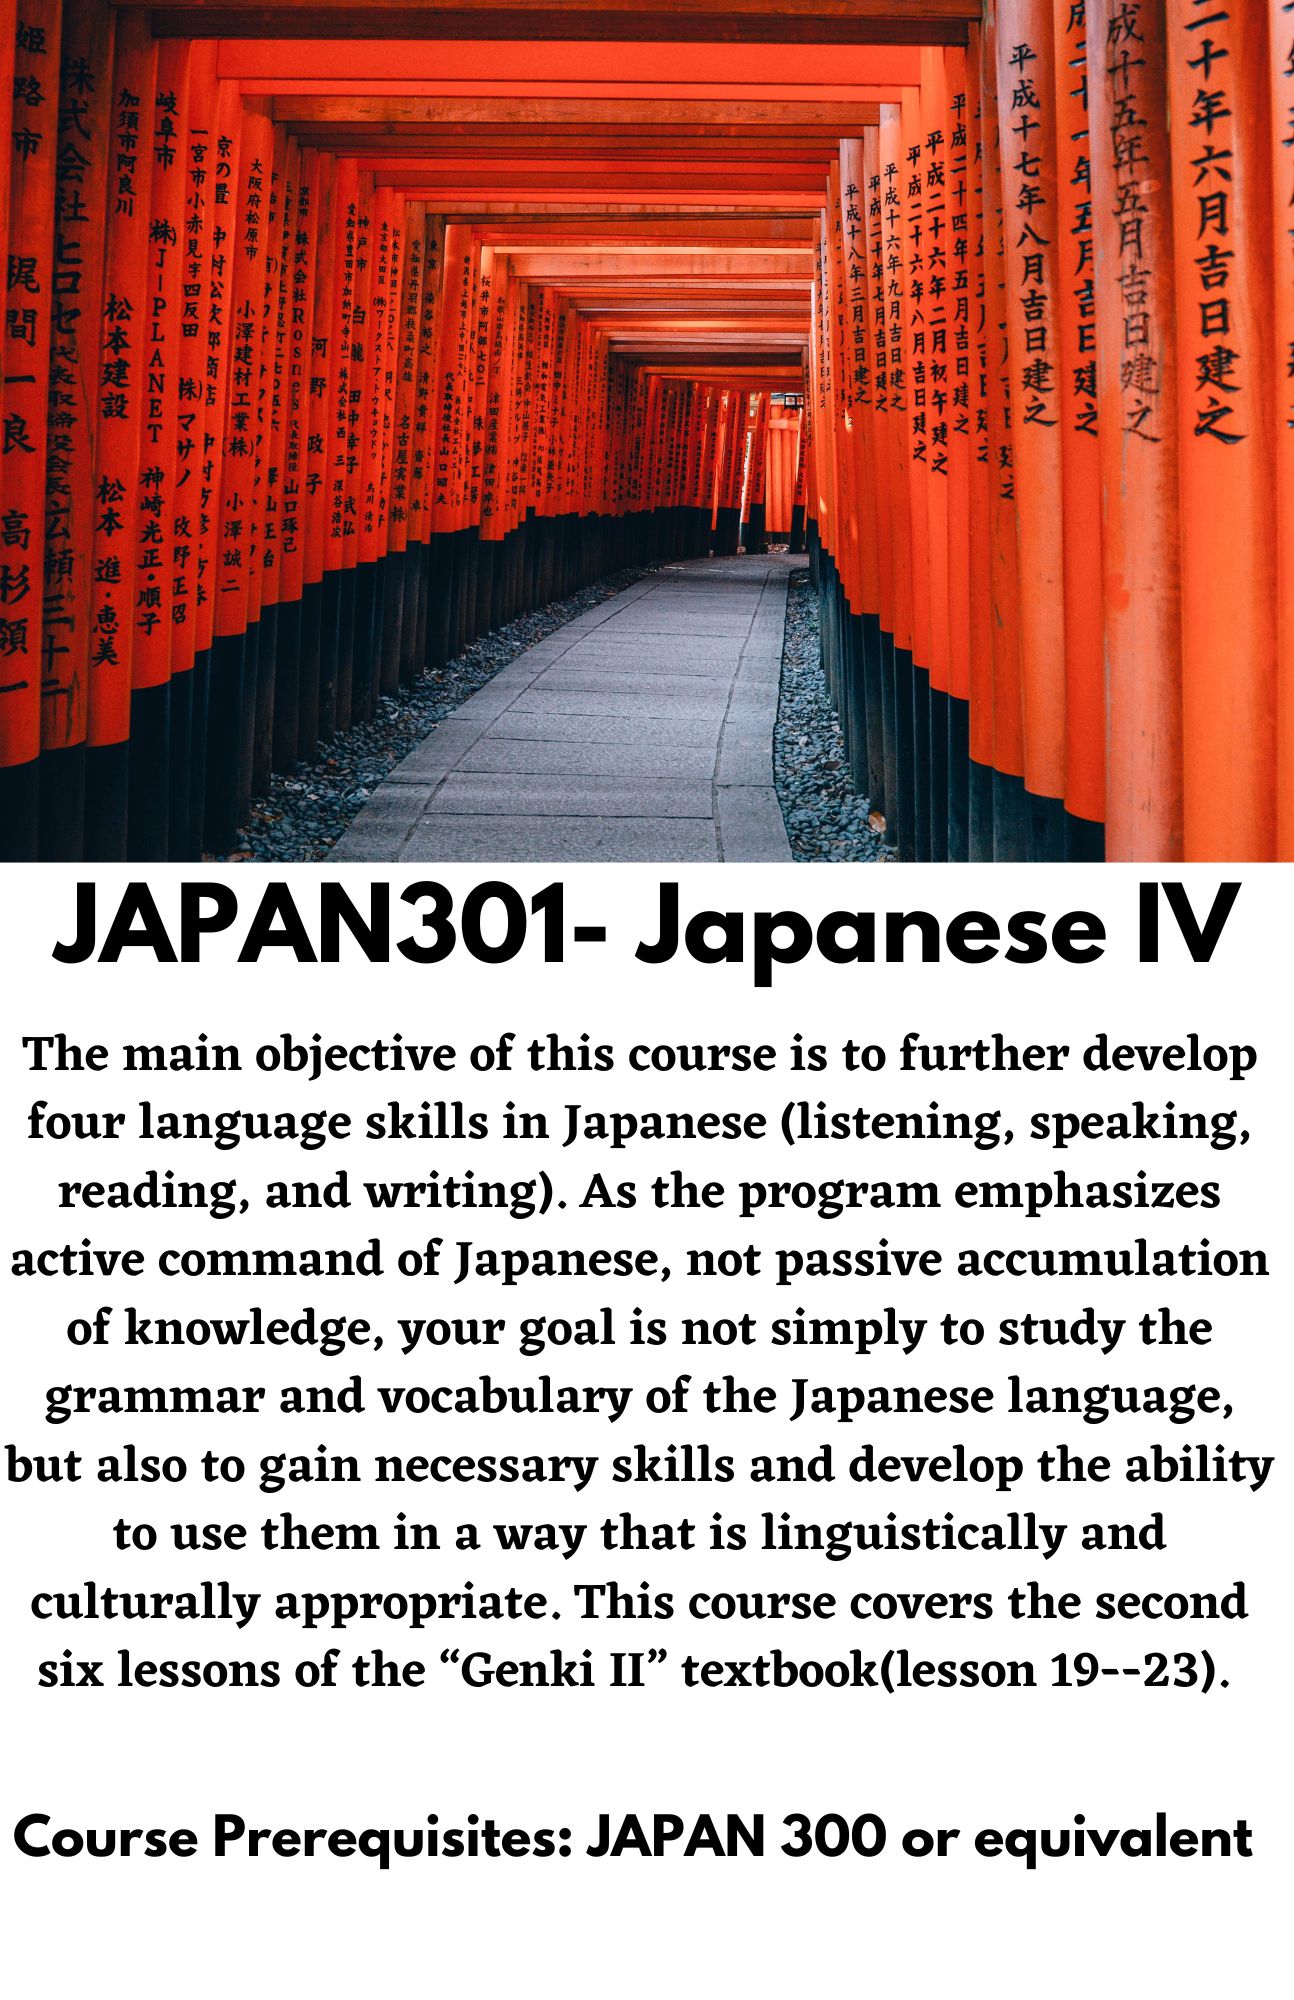 JAPAN301- Japanese IV. The main objective of this course is to further develop four language skills in Japanese (listening, speaking, reading, and writing). As the program emphasizes active command of Japanese, not passive accumulation of knowledge, your goal is not simply to study the grammar and vocabulary of the Japanese language, but also to gain necessary skills and develop the ability to use them in a way that is linguistically and culturally appropriate. This course covers the second six lessons of the “Genki II” textbook(lesson 19--23).